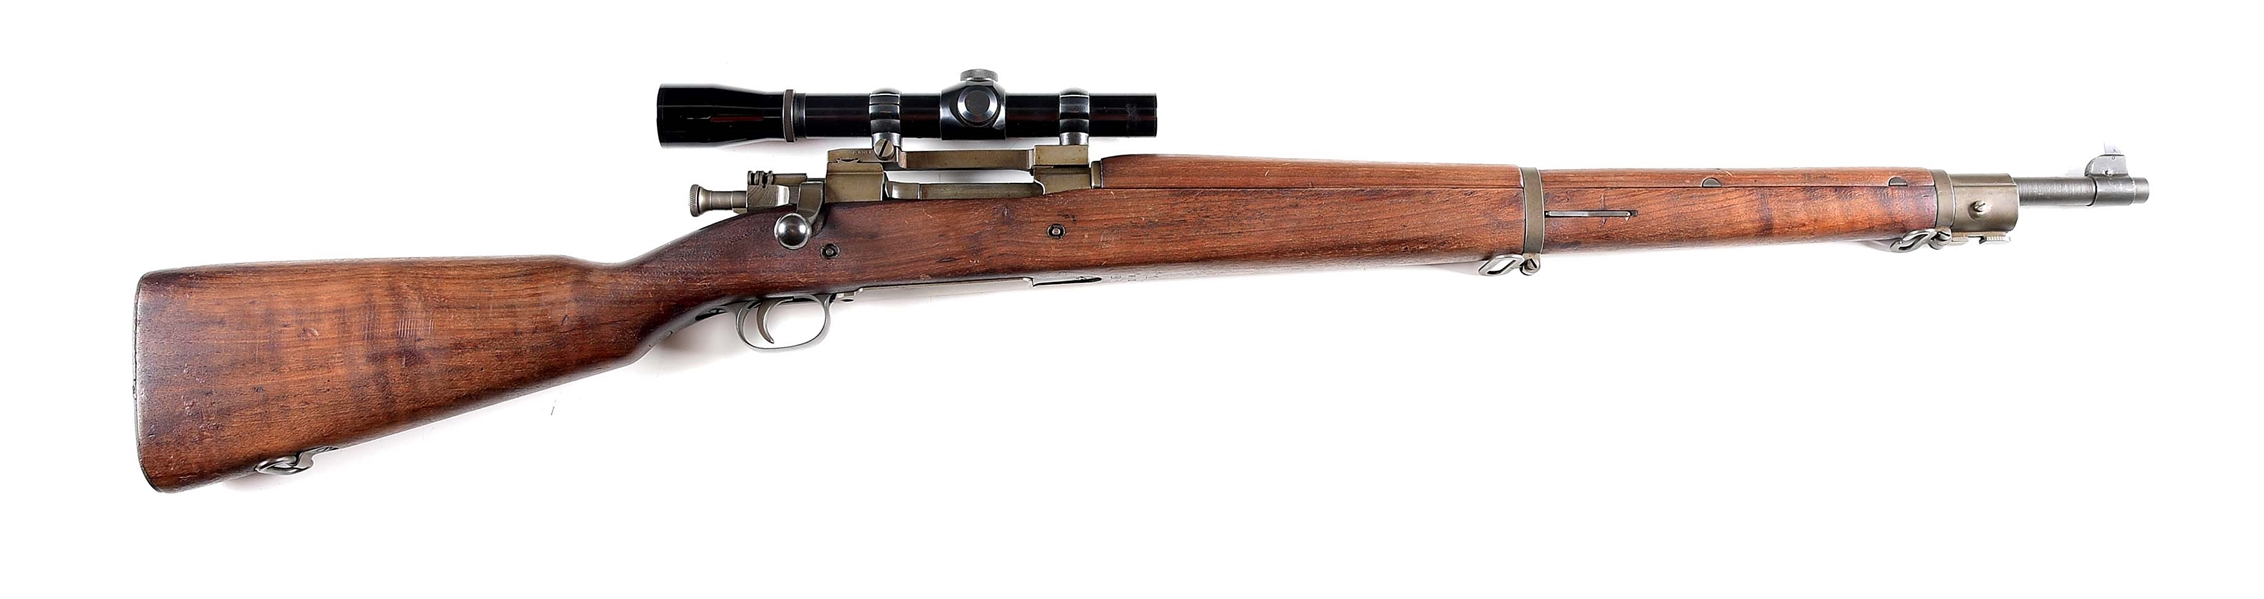 (C) REMINGTON 1903A4 BOLT ACTION SNIPER RIFLE WITH LYMAN ALL-AMERICAN SCOPE.